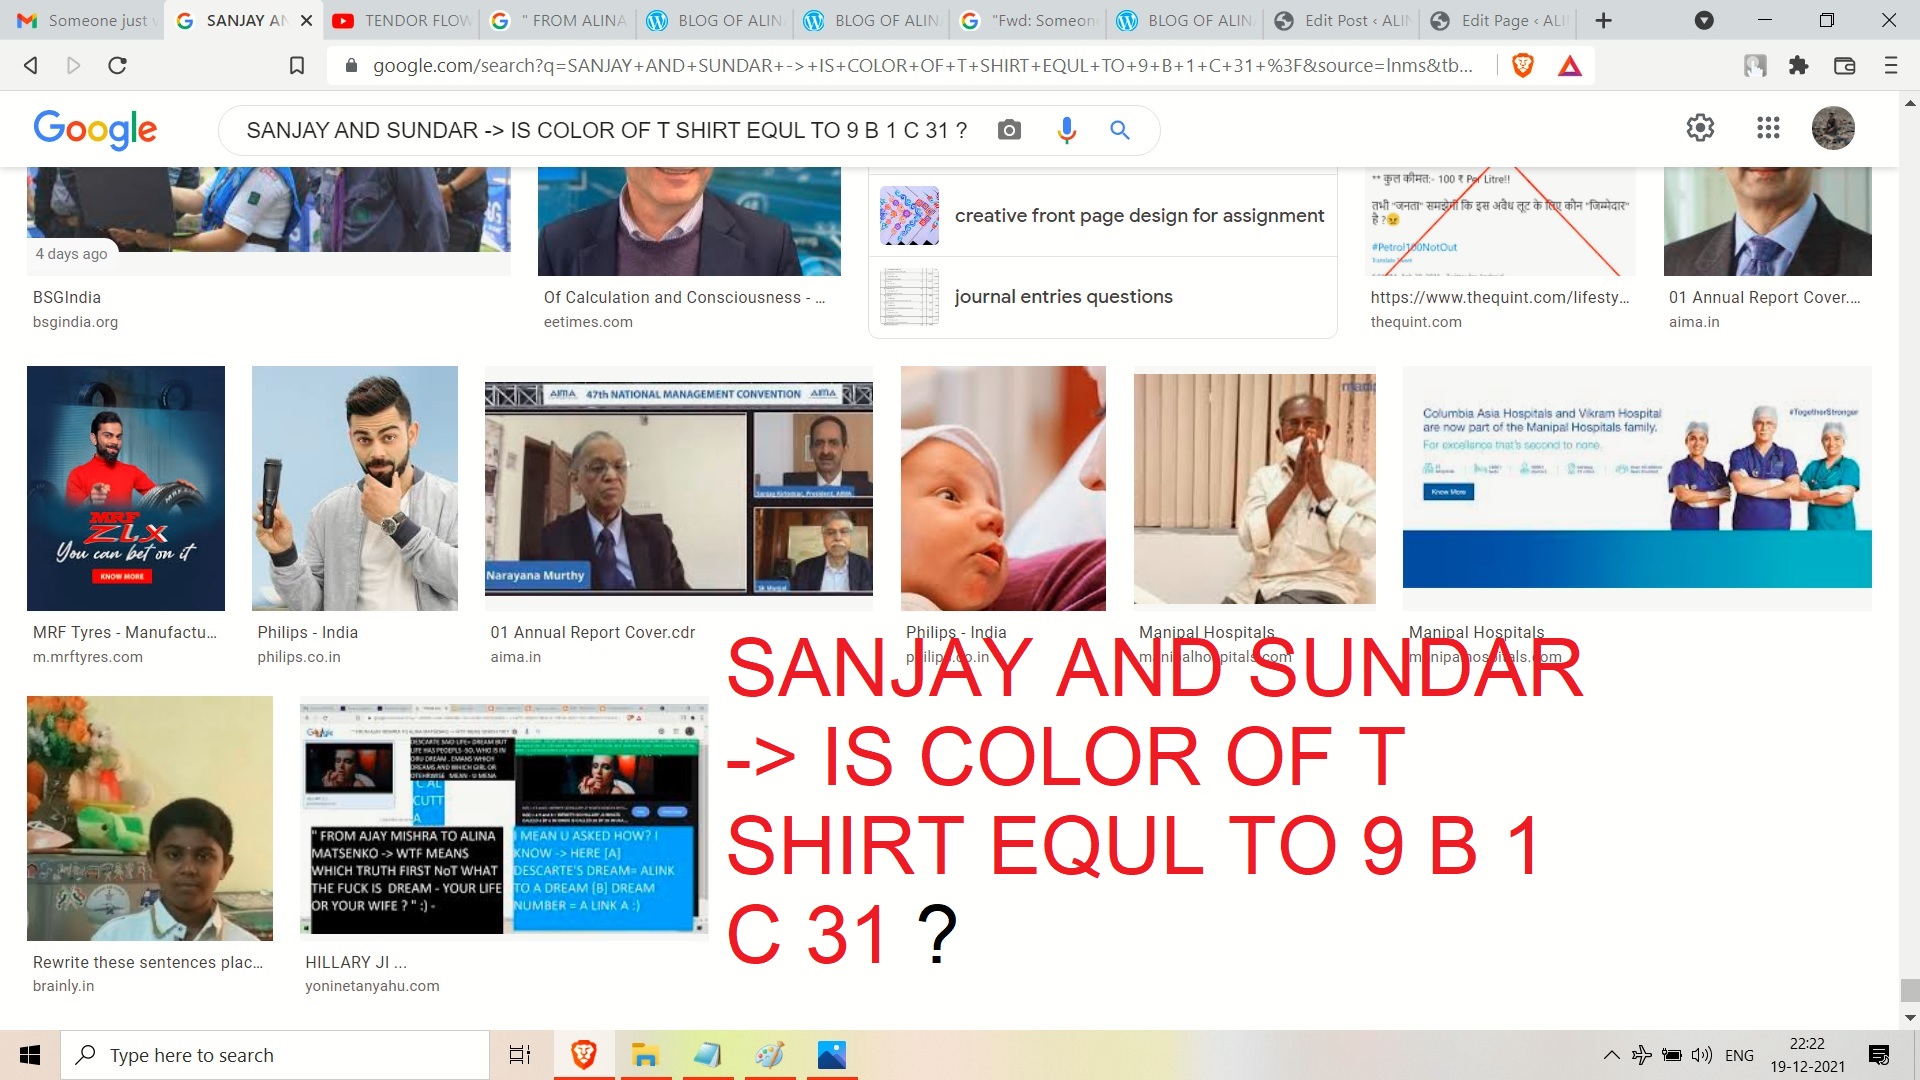 SANJAY AND SUNDAR IS COLOR OF T SHIRT EQUL TO 9 B 1 C 31.......................